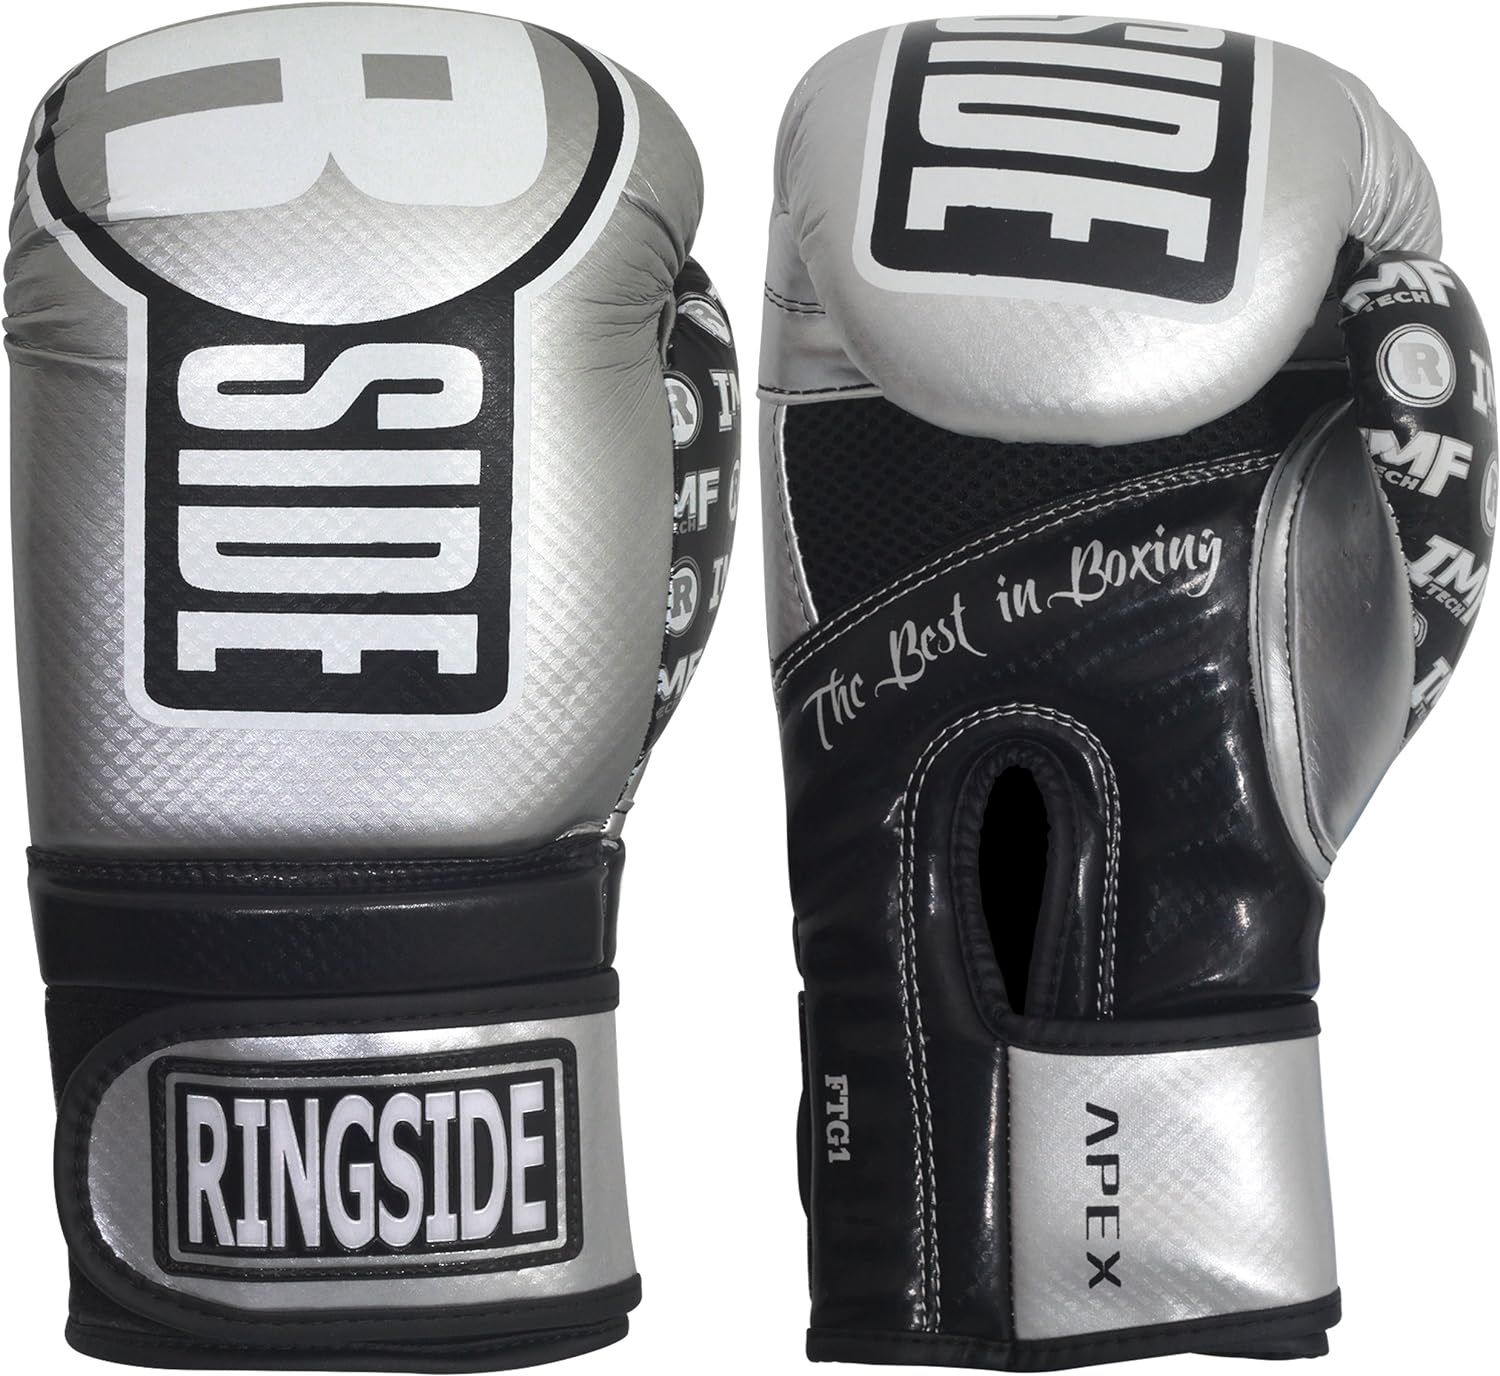 All-Purpose Training Punching Bag Mitts w/ Wrist Support BLK Details about   Kids Boxing Gloves 